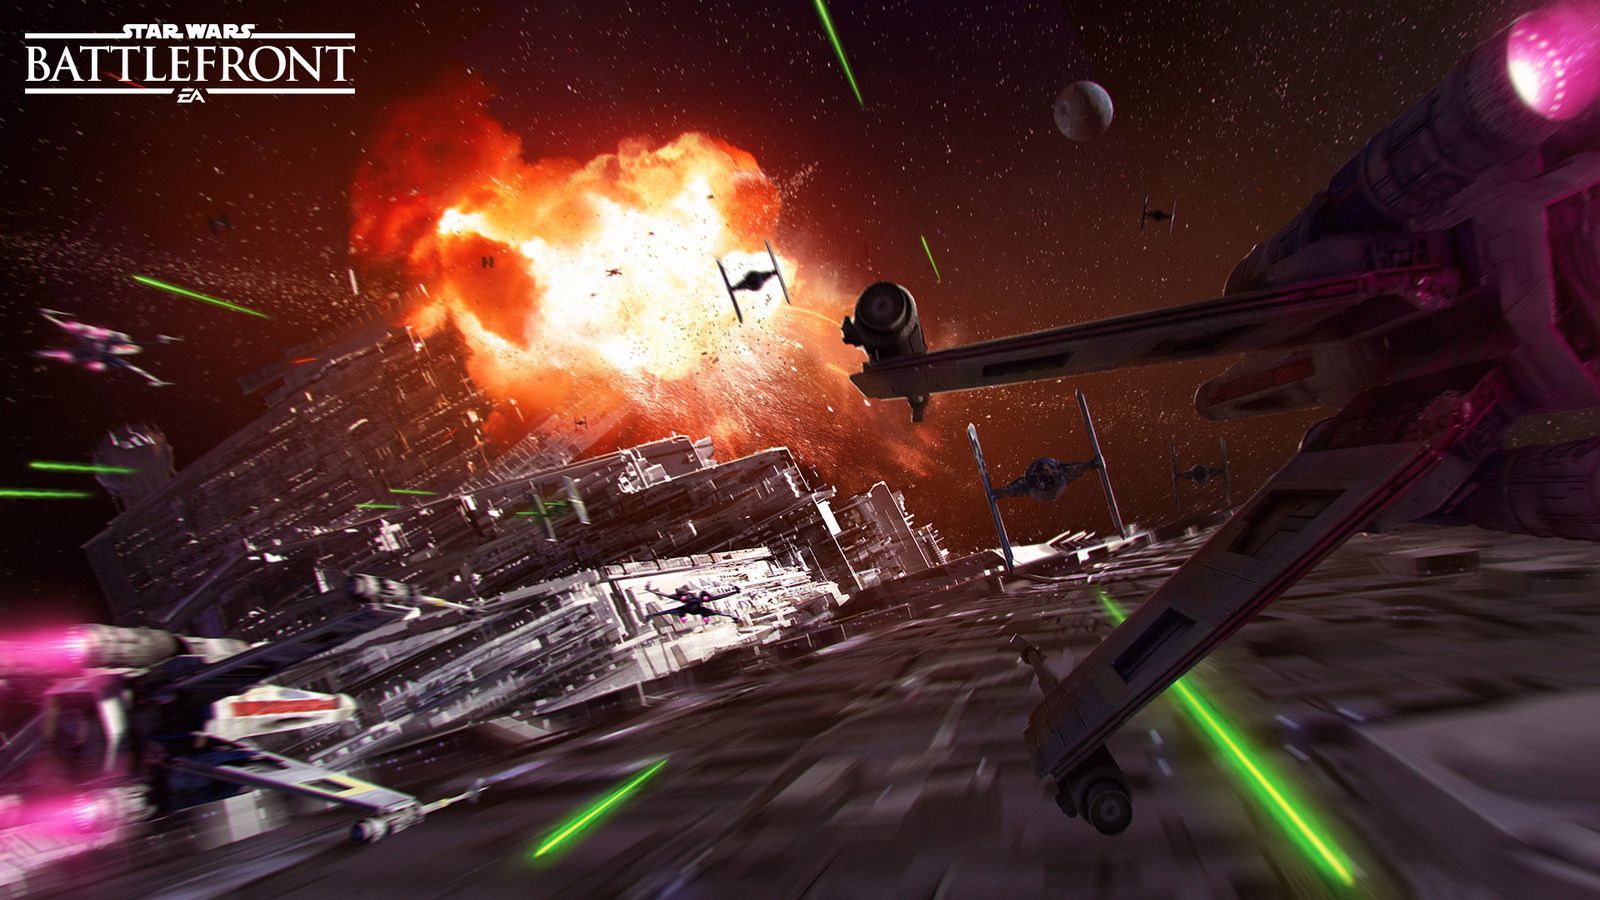 Blow up a Star Destroyer and the Death Star in Star Wars Battlefront's new mode